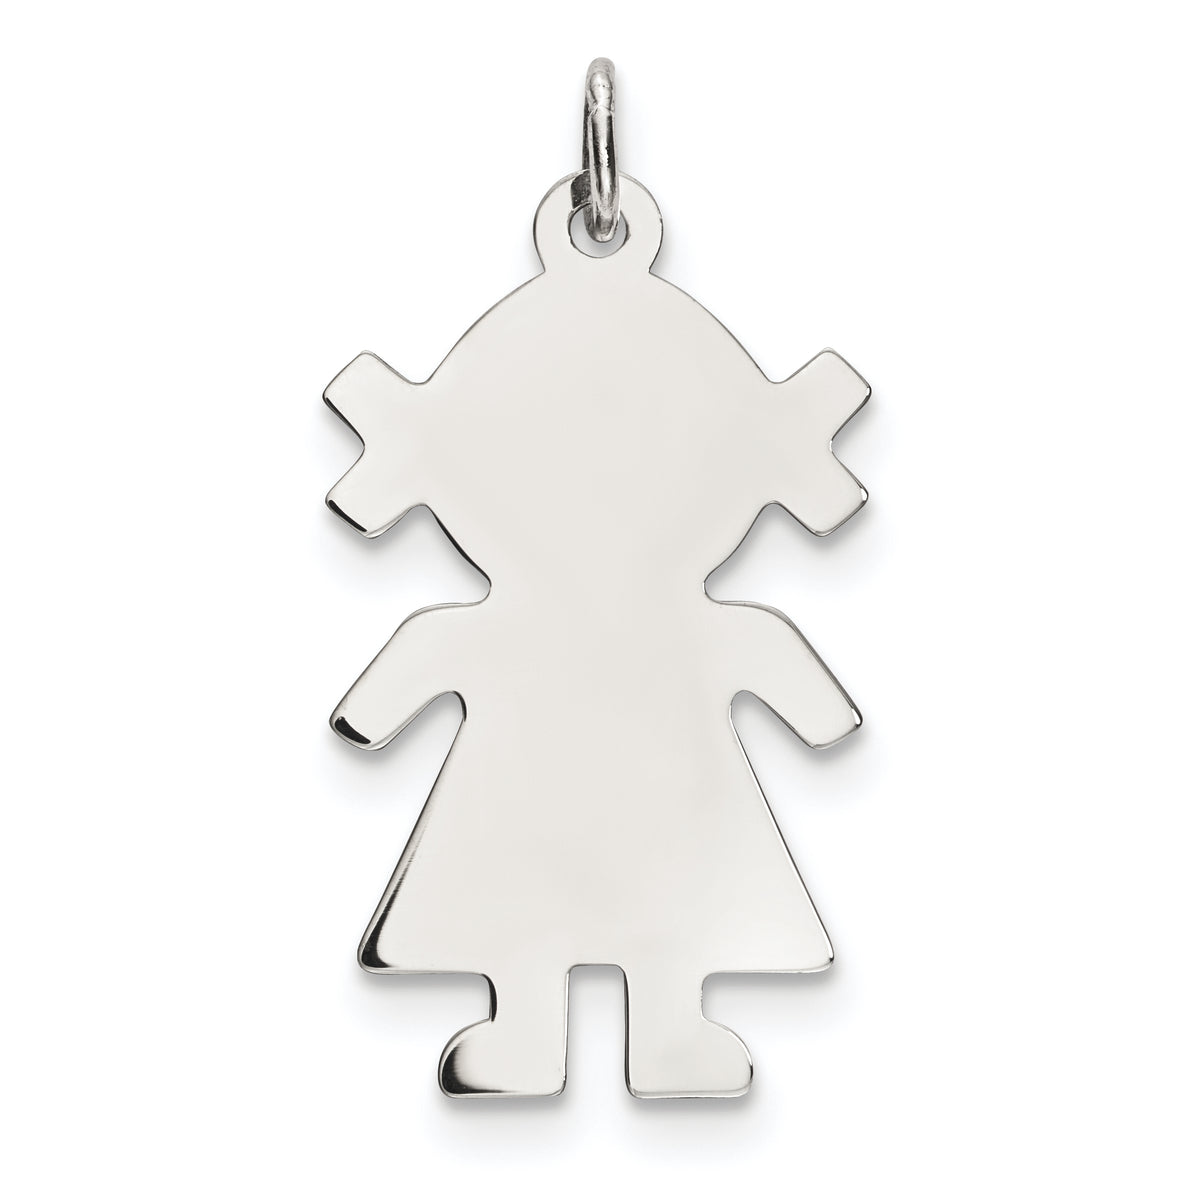 Sterling Silver Rhod-plated Eng. Girl Polished Front/Satin Back Disc Charm